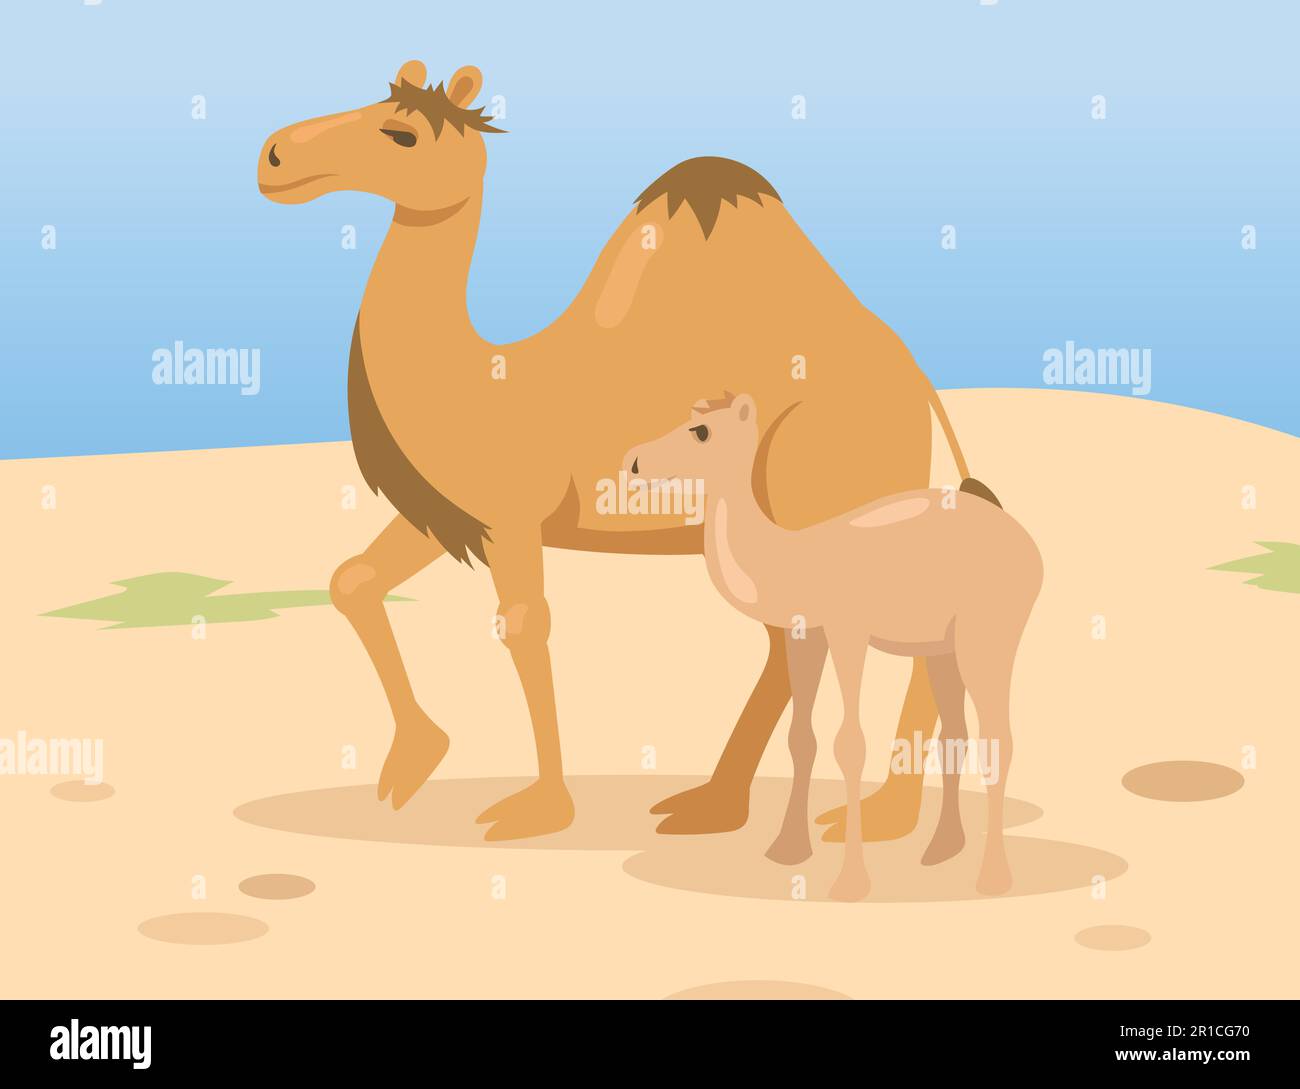 One hump camel mother with colt child walking in desert Stock Vector